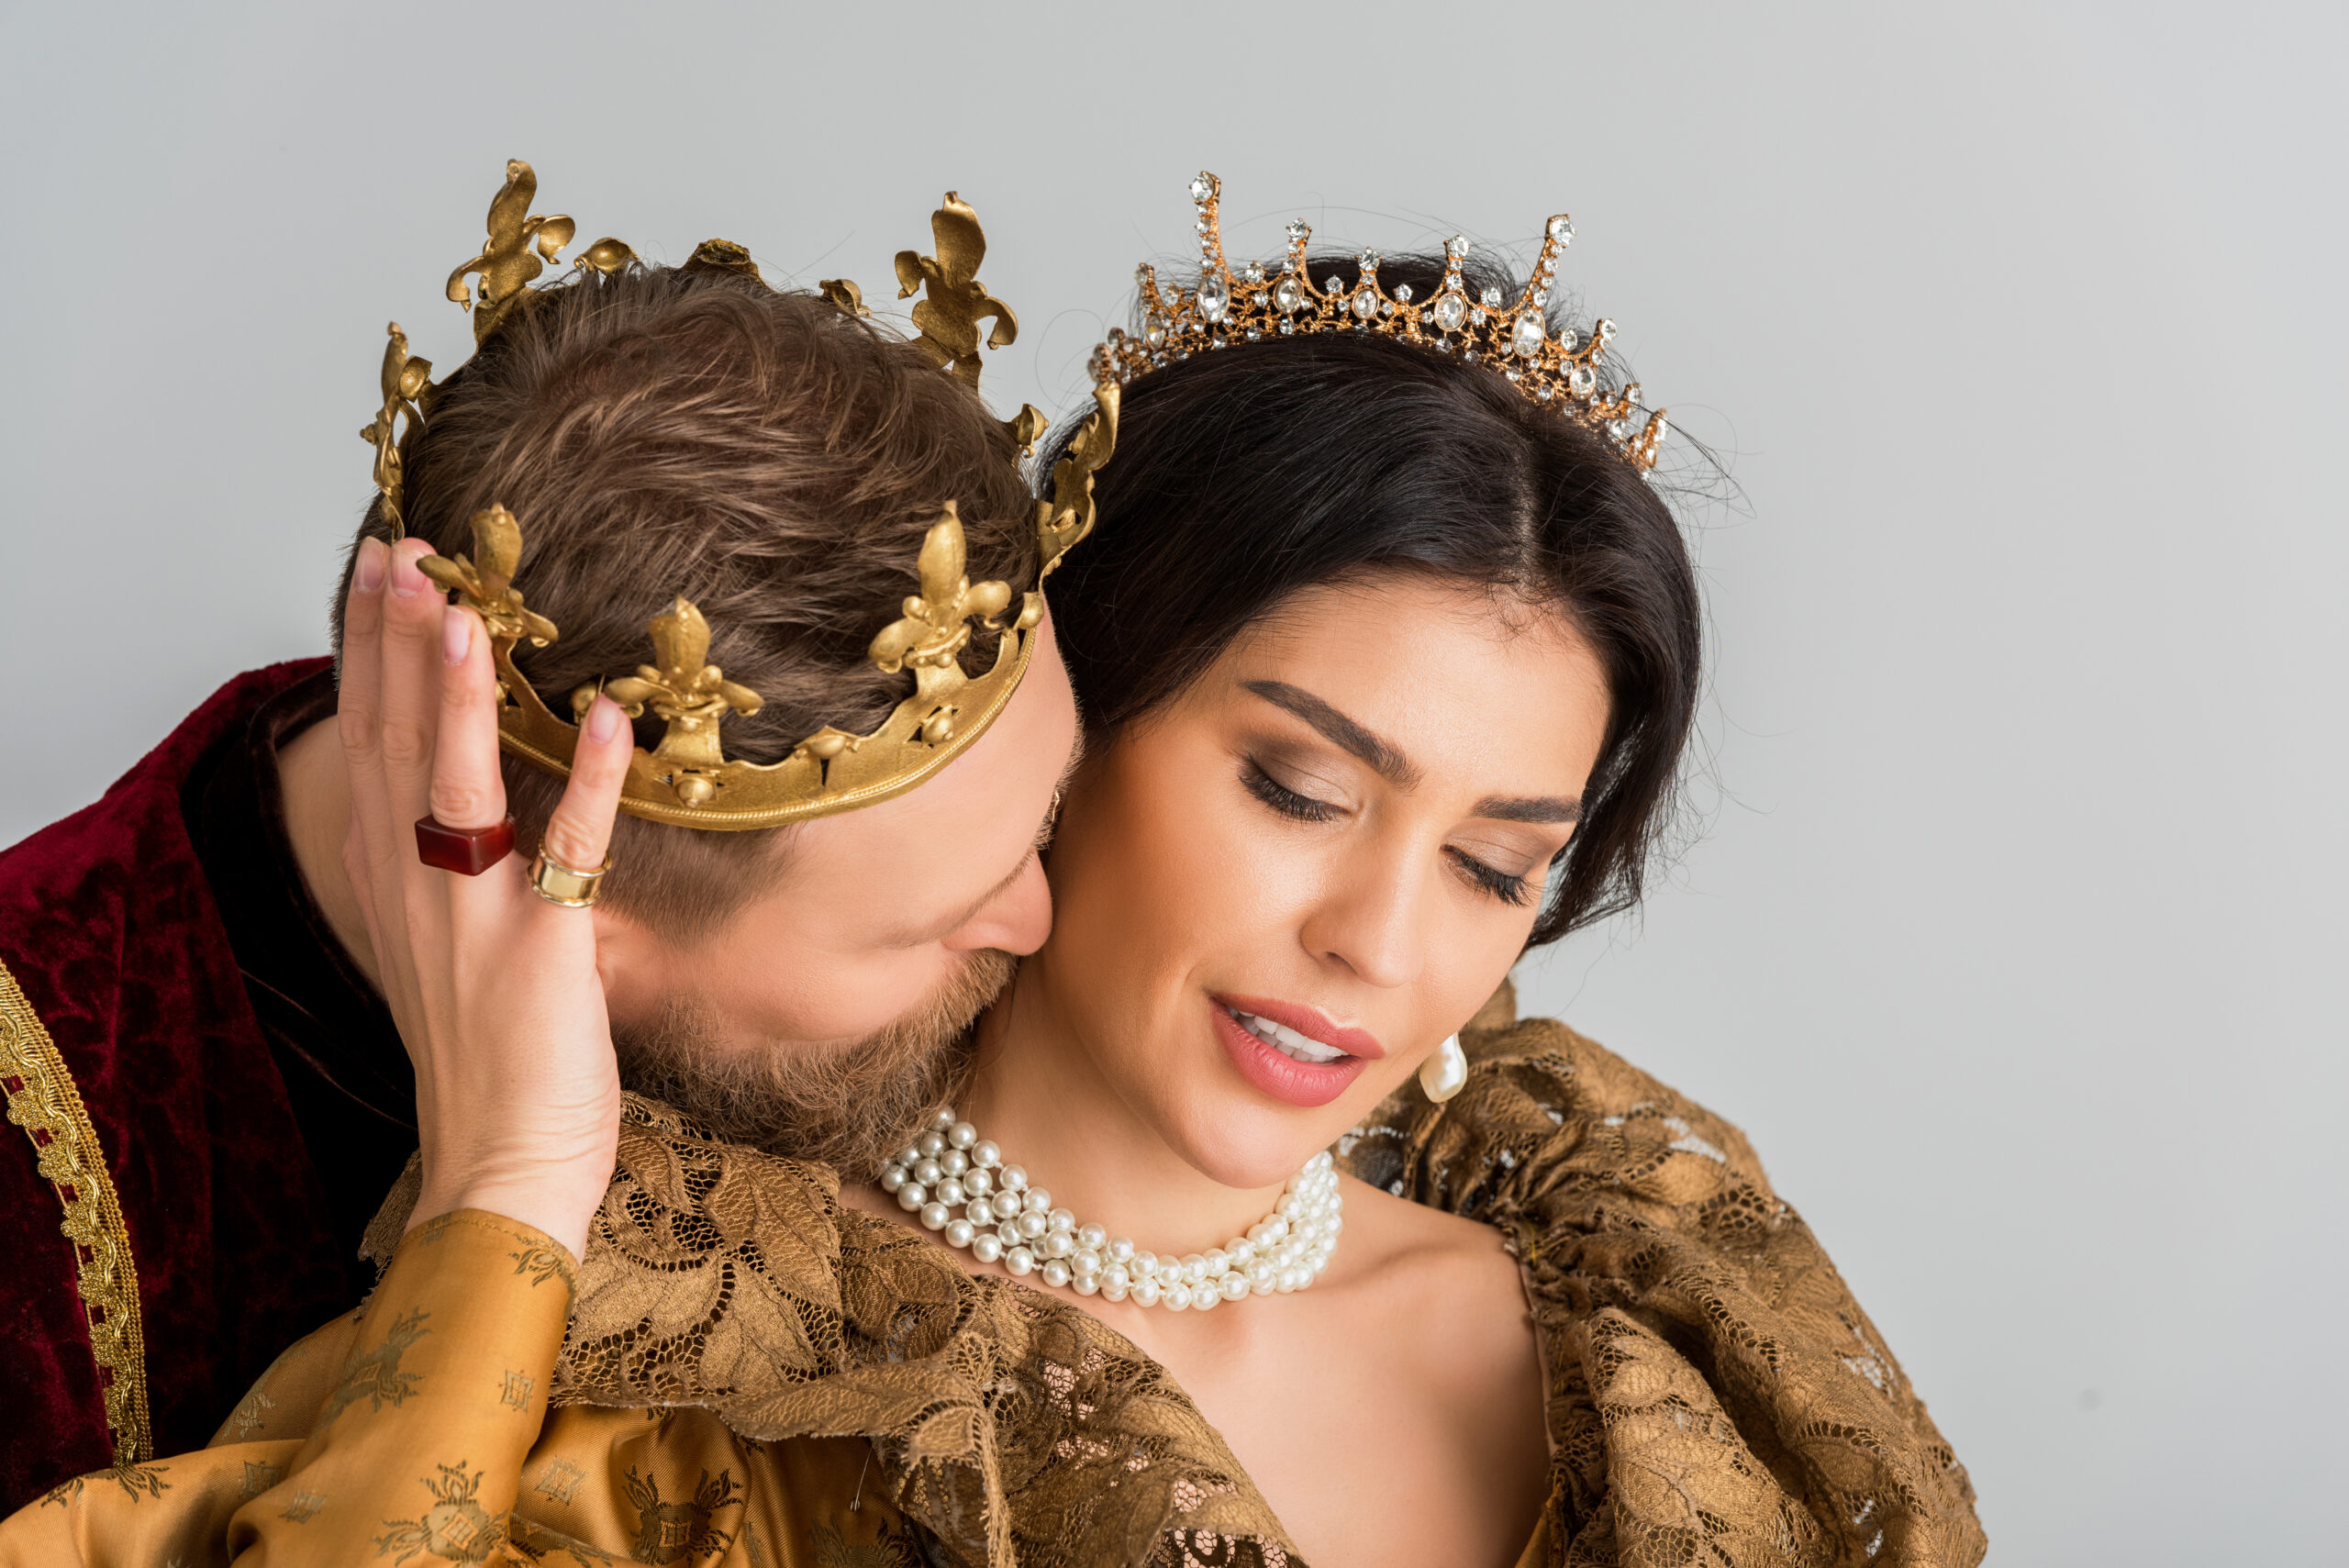 5 steps to treating her like a queen